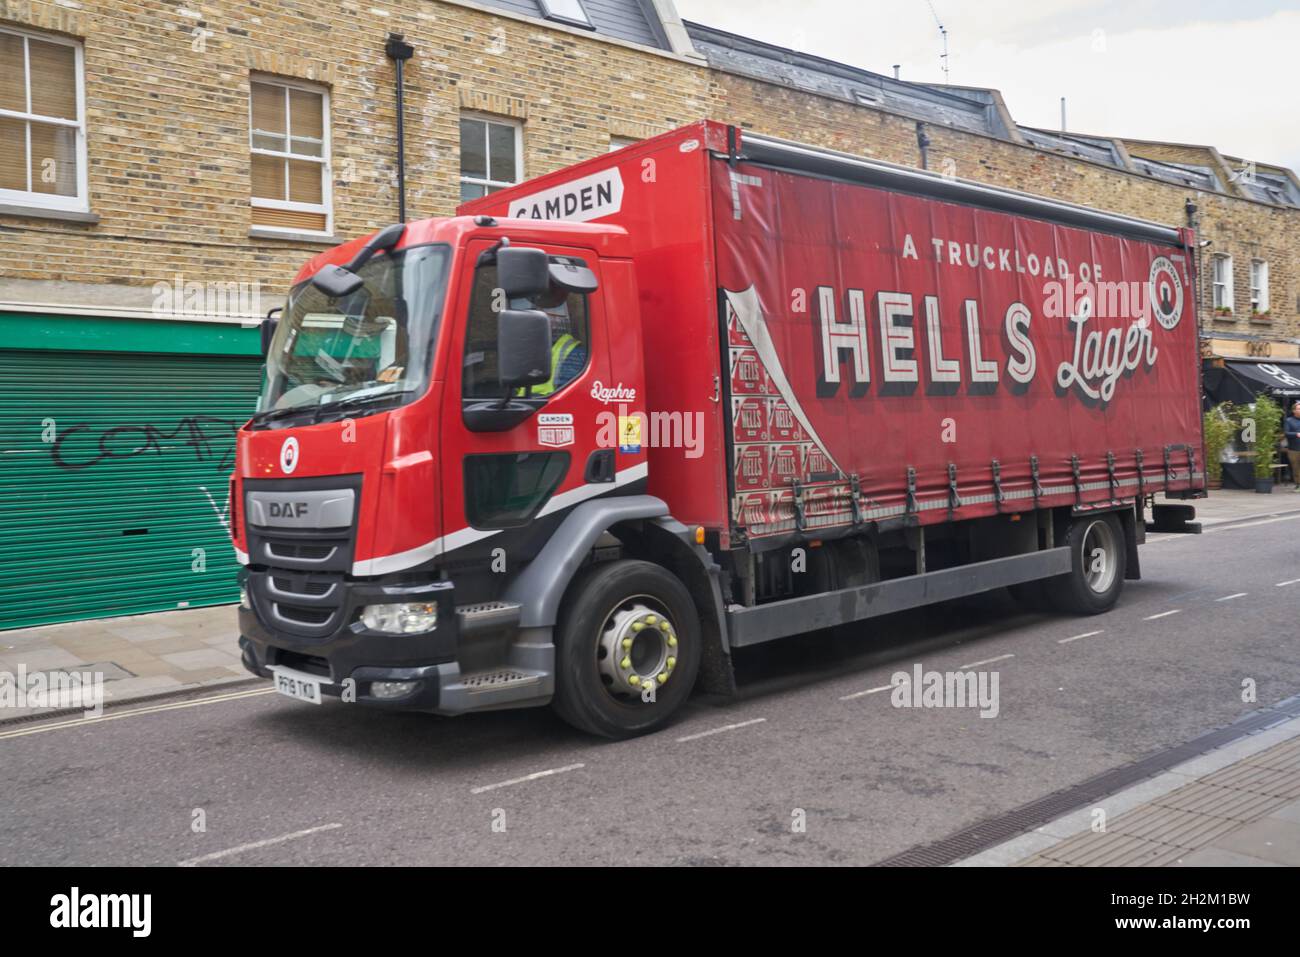 Hells Lager consegna a Londra birra consegna camion birra camion birra consegna camion birra consegna camion Foto Stock